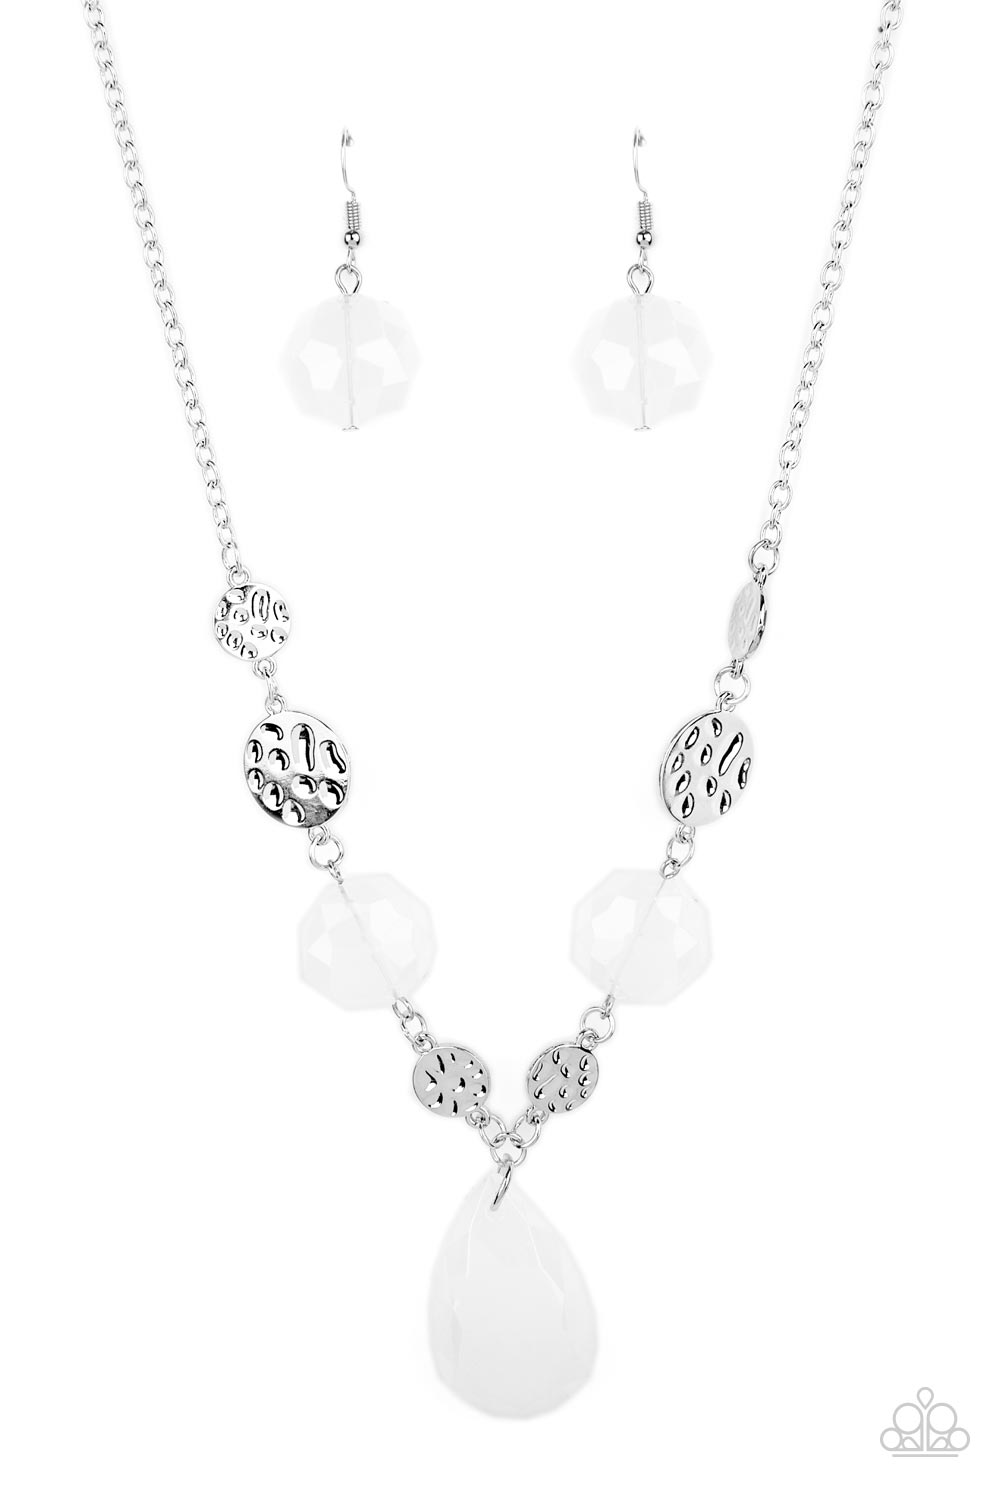 DEW What You Wanna DEW White Necklace - Paparazzi Accessories  A dewy white teardrop swings from the bottom of interlinking hammered silver discs and matching dewy white crystal-like beads, creating a dreamy display below the collar. Features an adjustable clasp closure.  Sold as one individual necklace. Includes one pair of matching earrings.